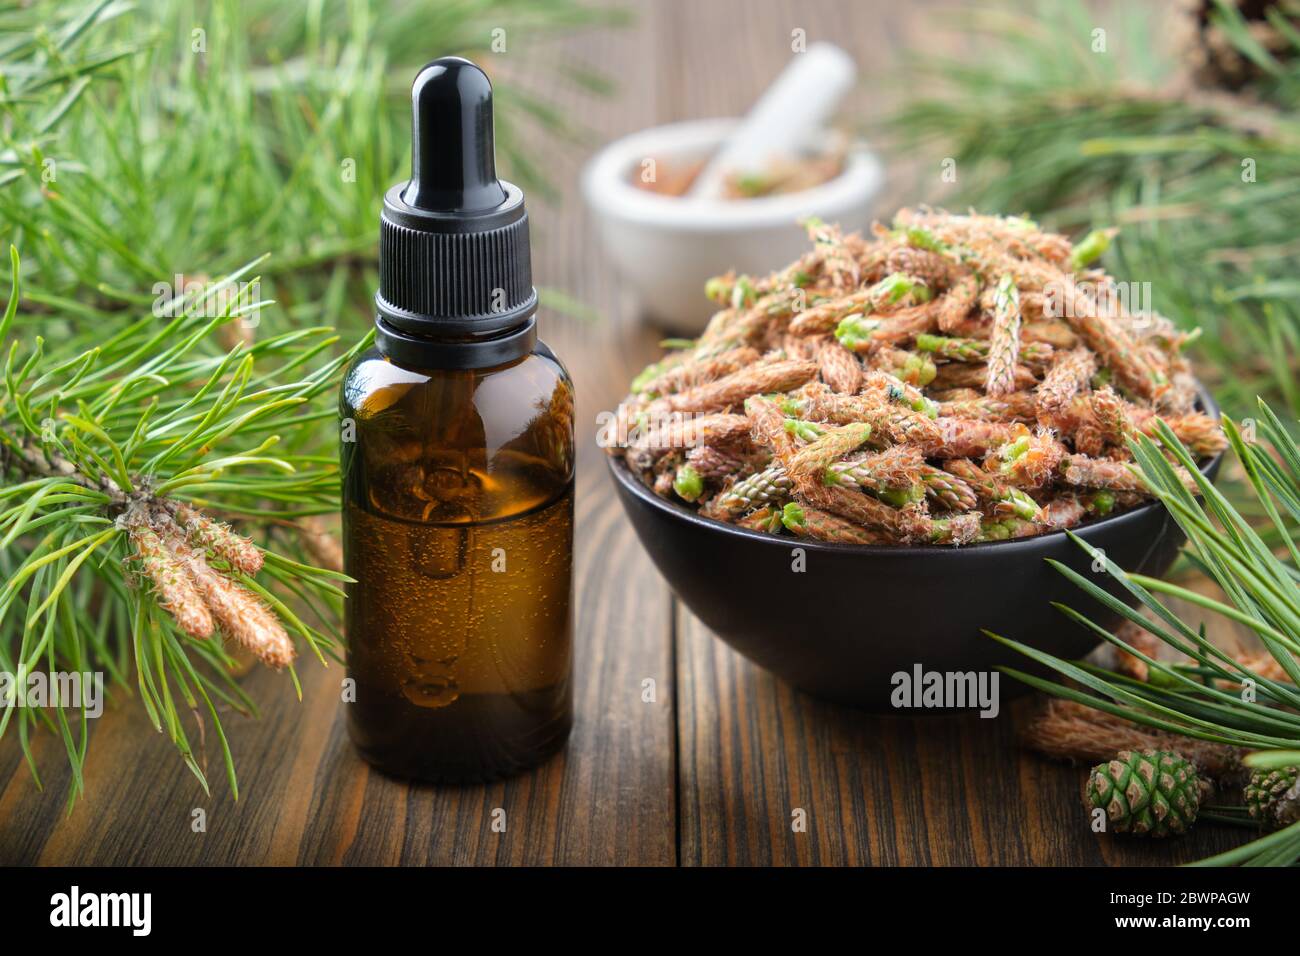 Dropper bottle of essential oil from pine buds, bowl of pine tree buds on wooden table. Stock Photo